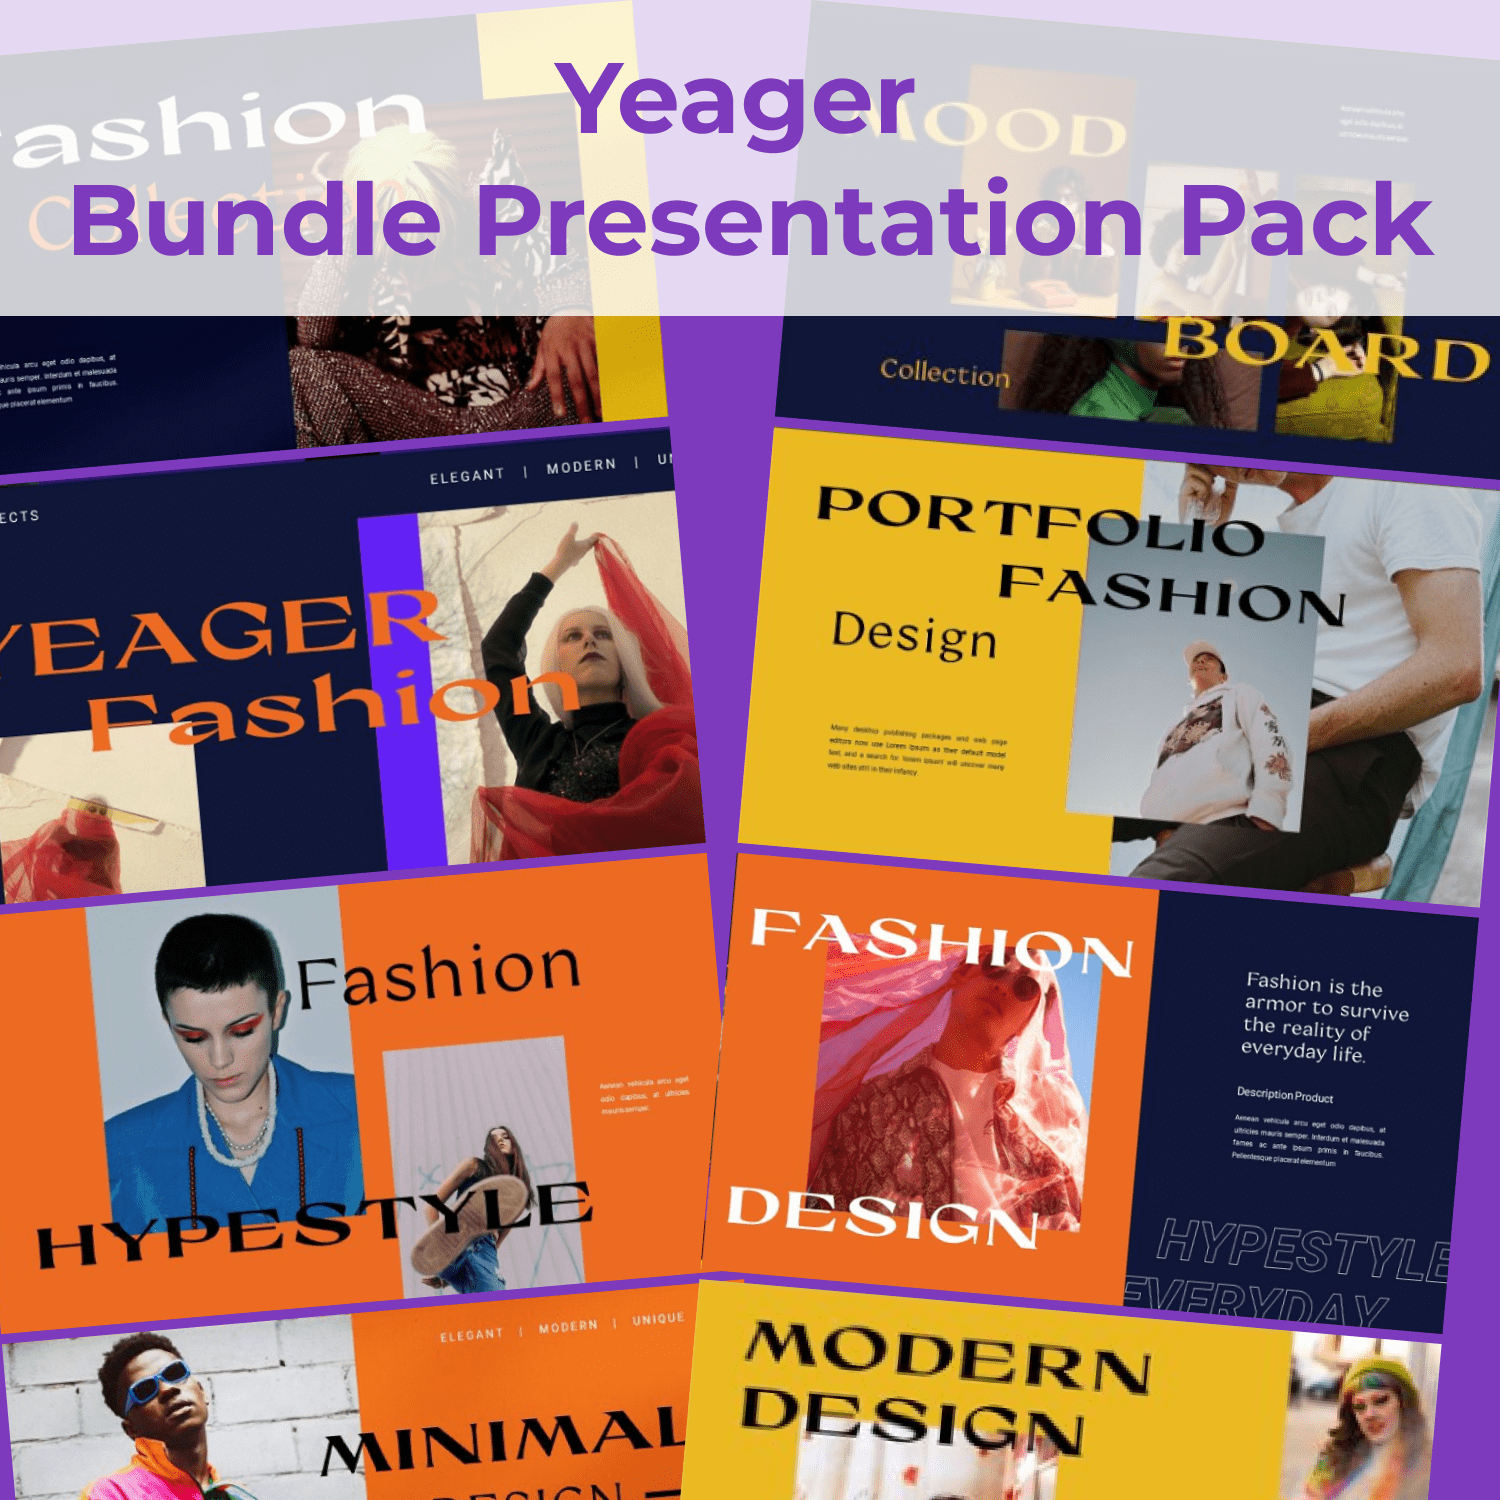 Yeager Bundle Presentation Pack cover image.